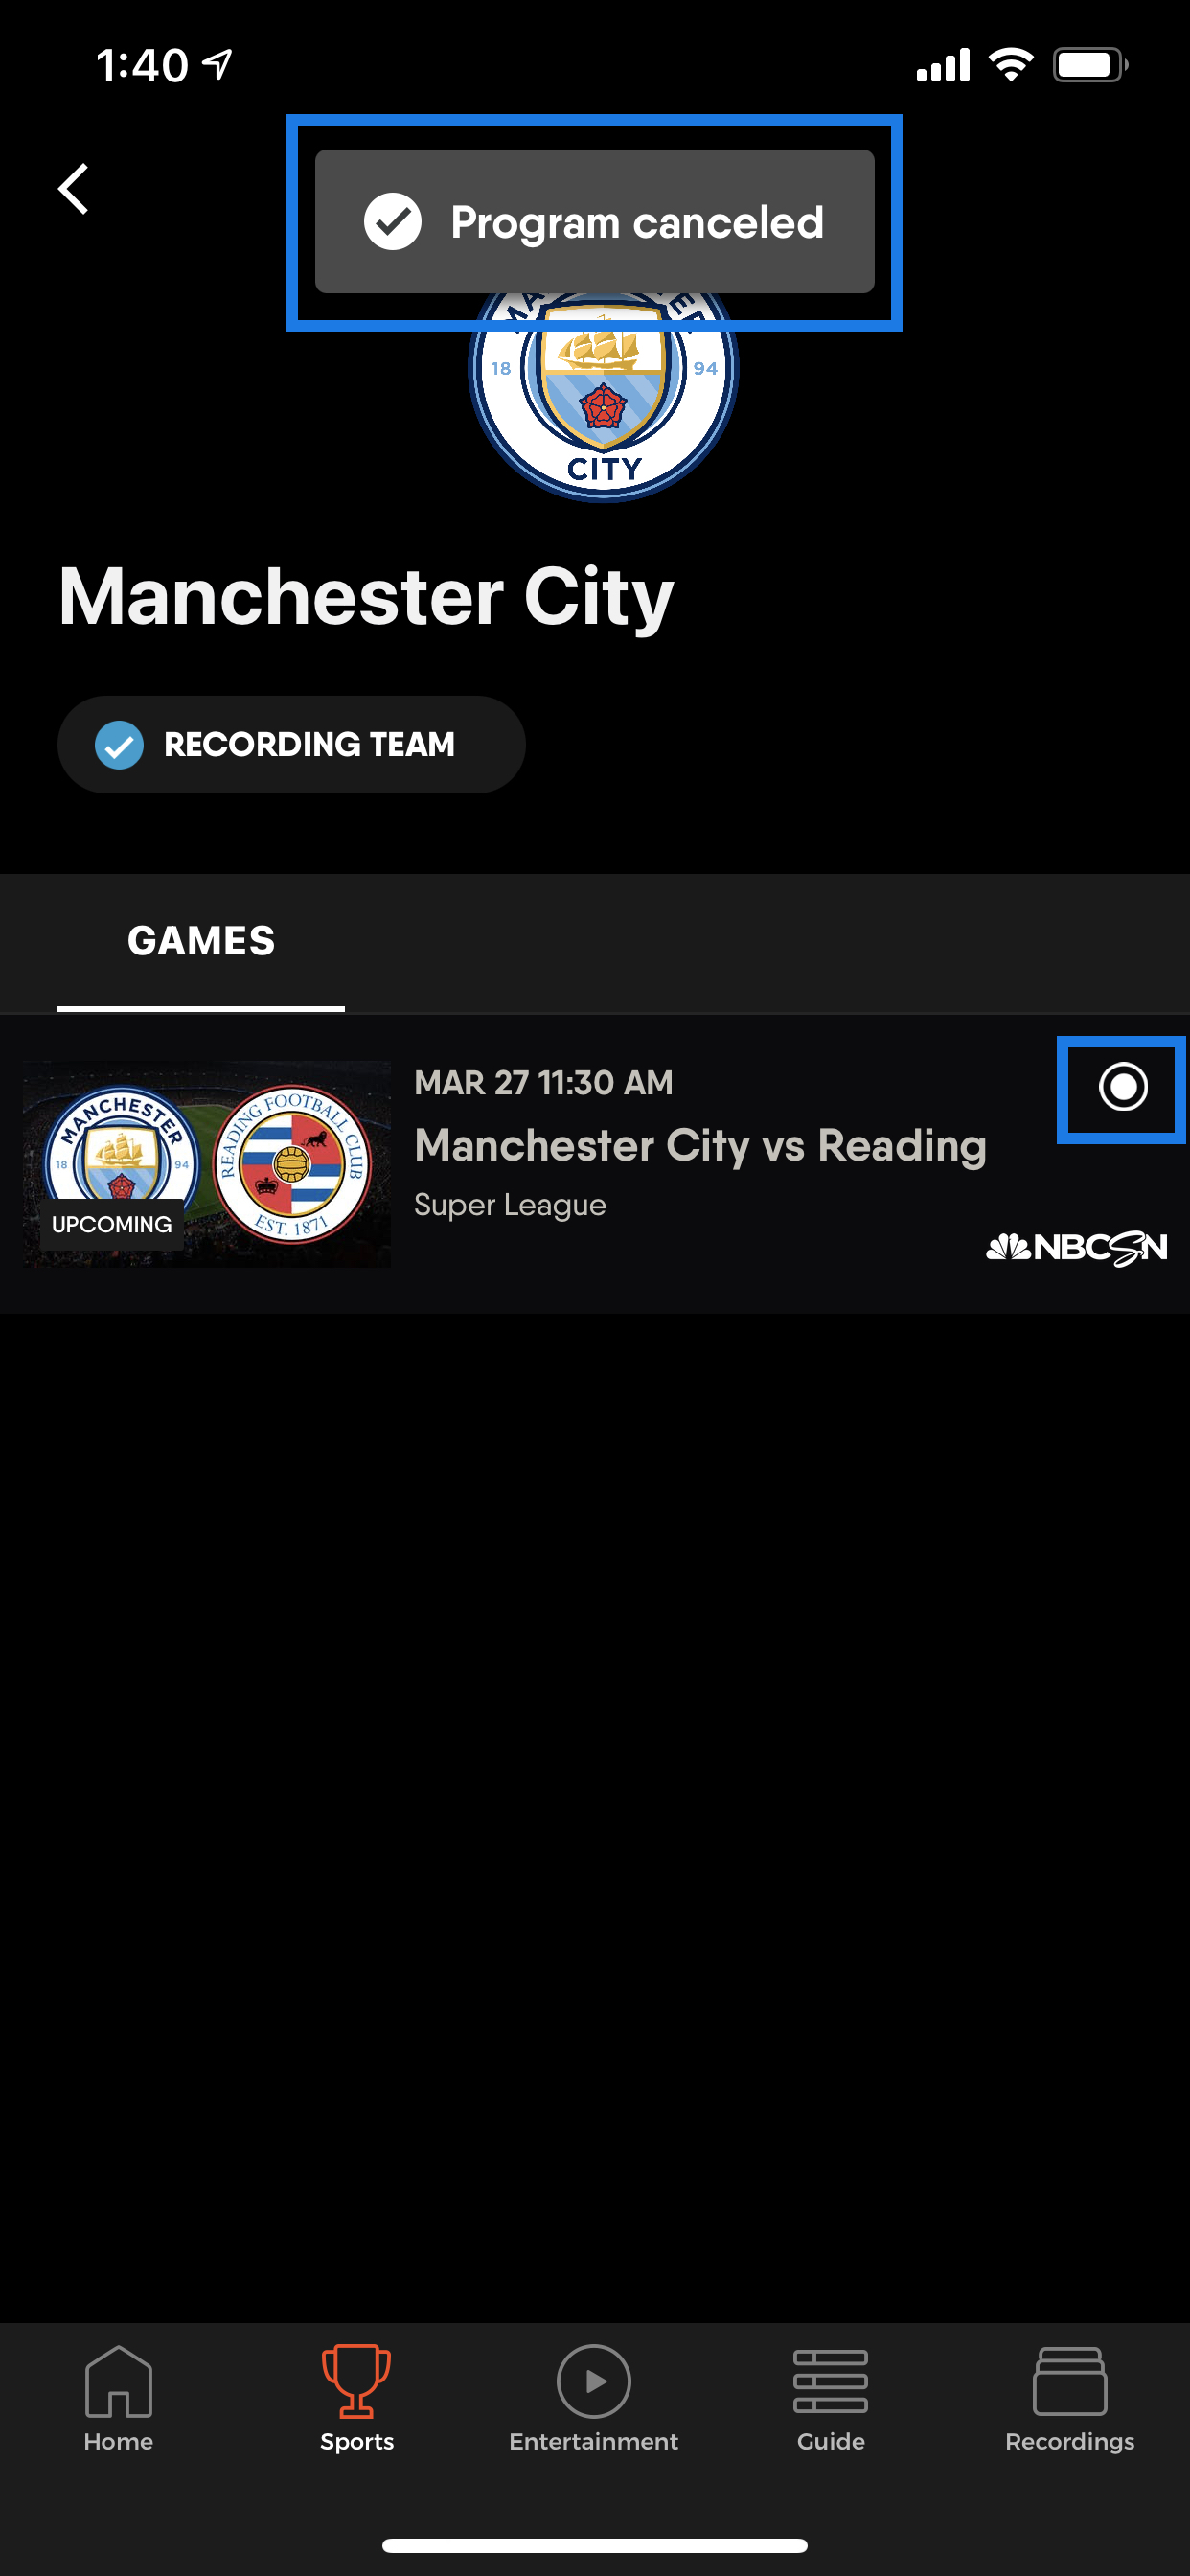 TEAM INFO screen for Manchester City on the FuboTV app for iOS with confirmation message that a recording will be skipped